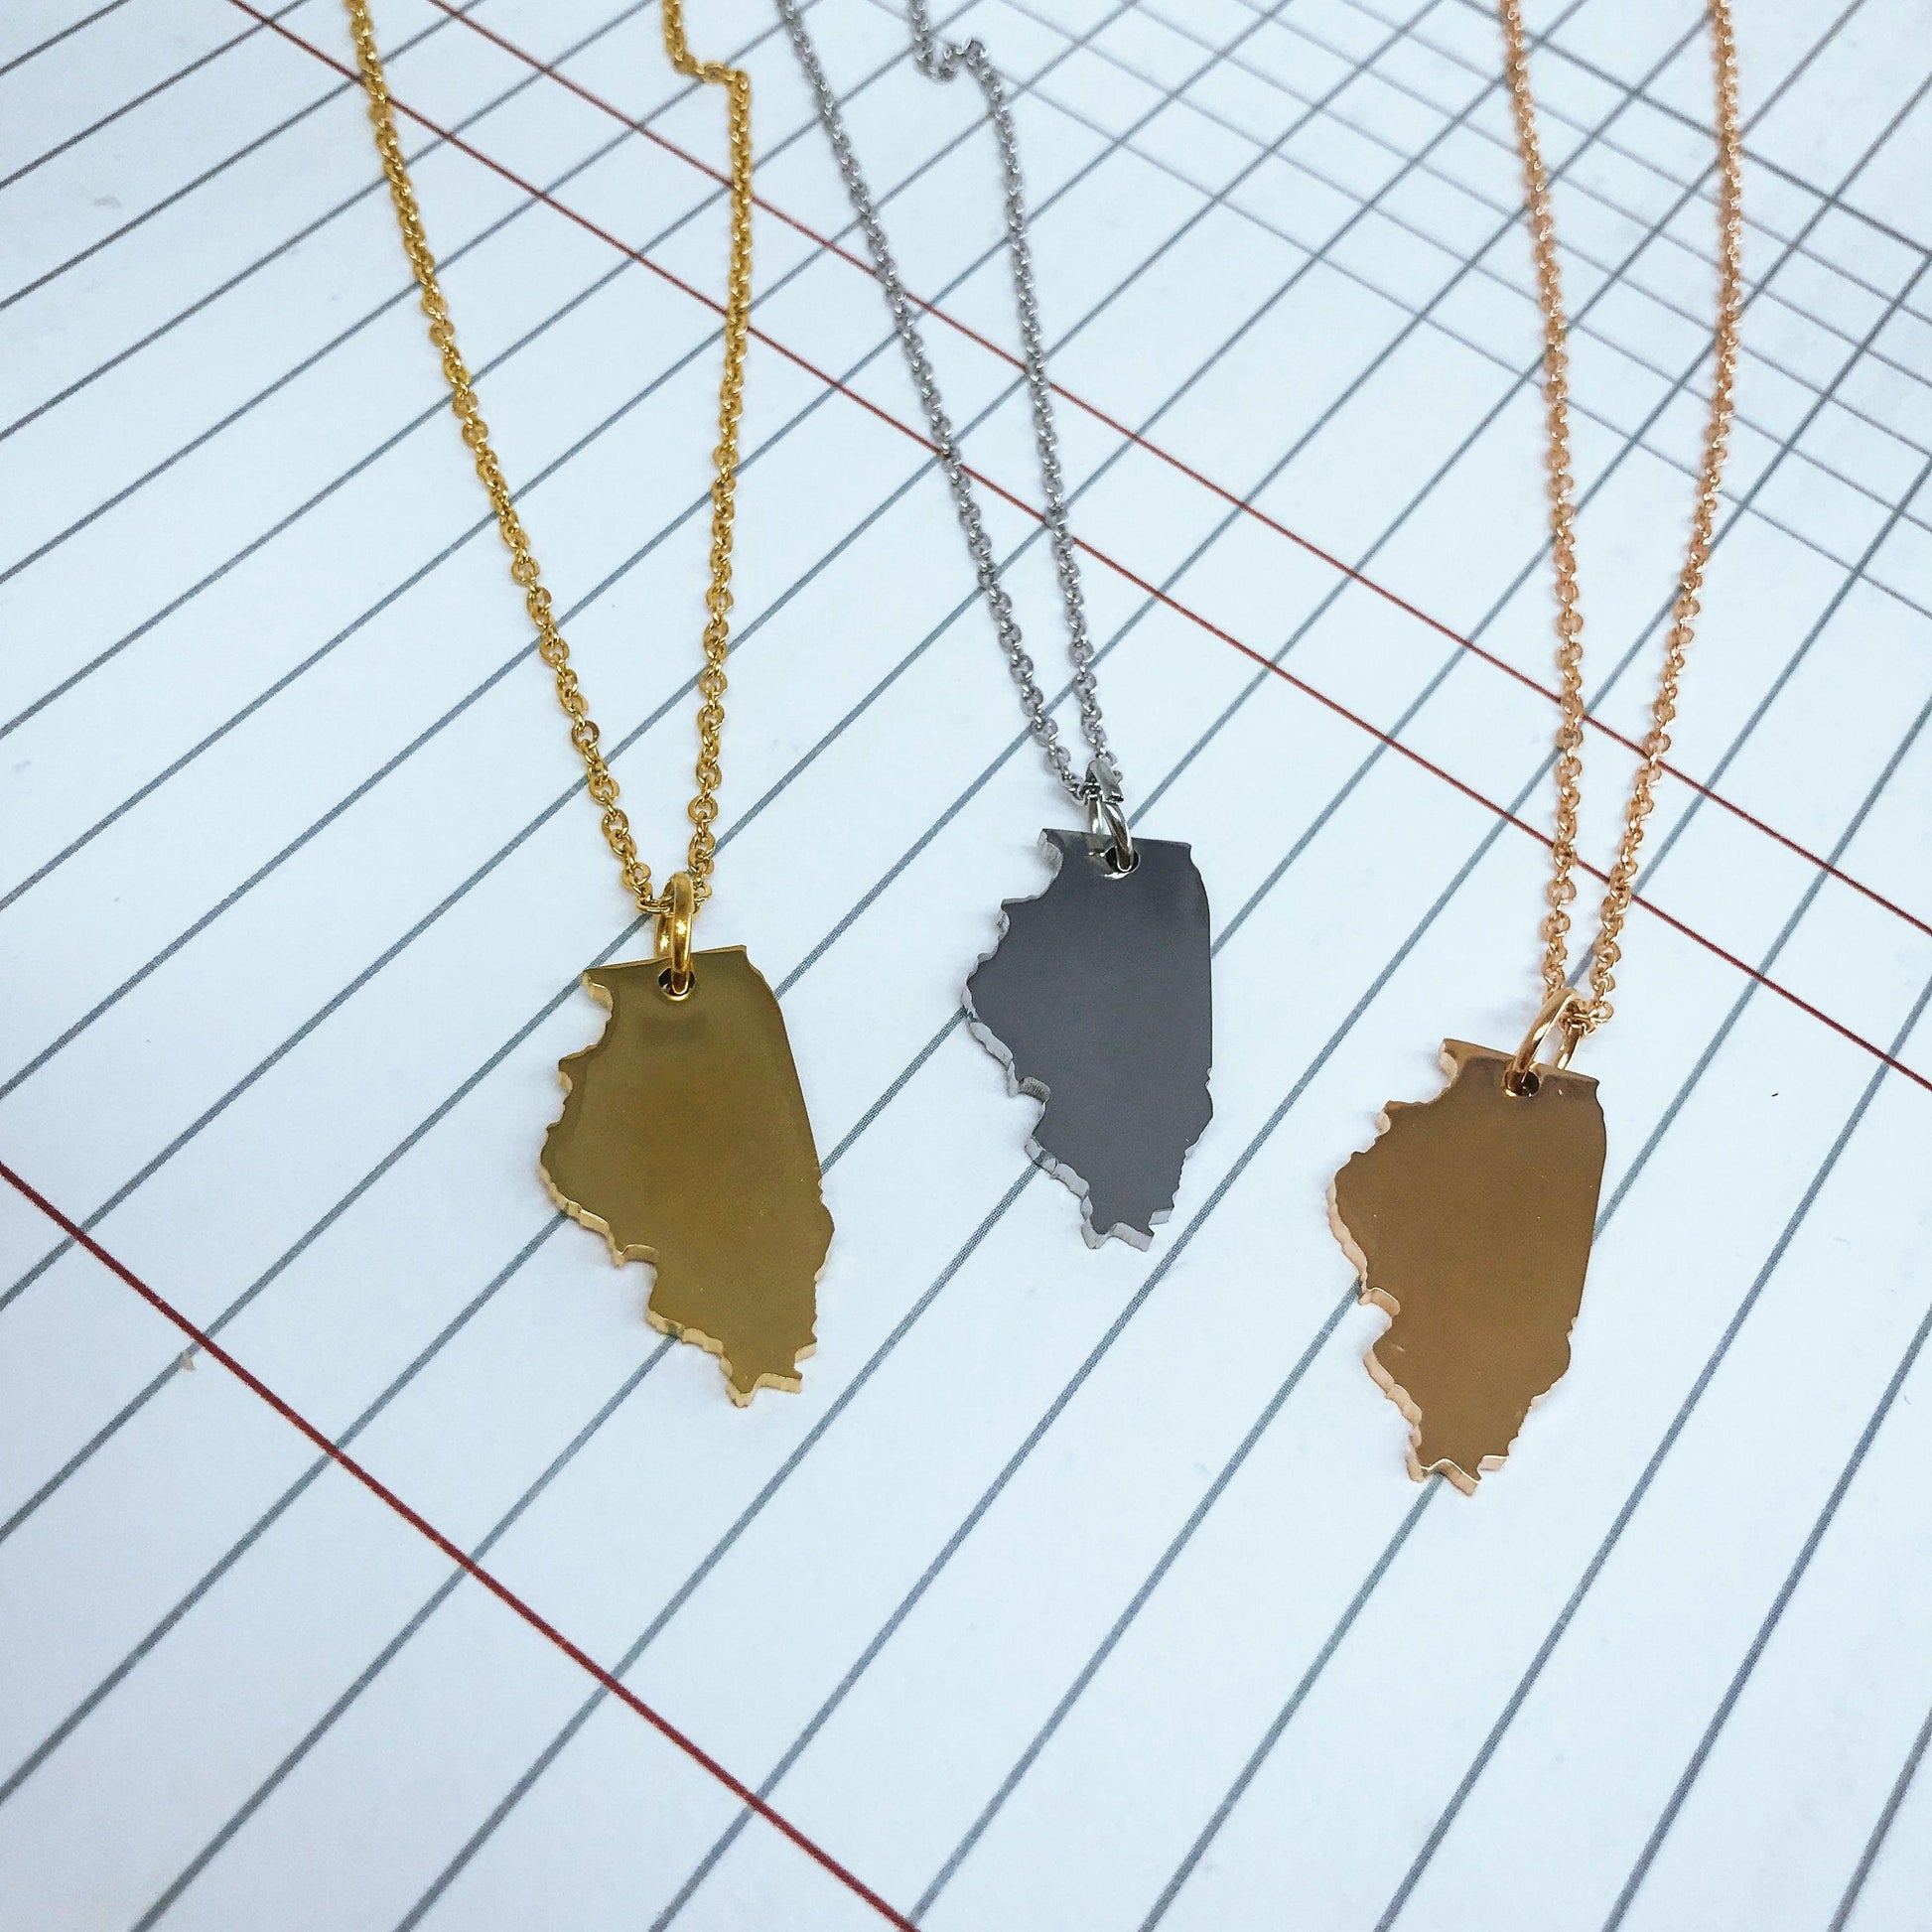 Illinois State Silhouette Necklaces in 3 different colors: Gold, Silver & Rose Gold